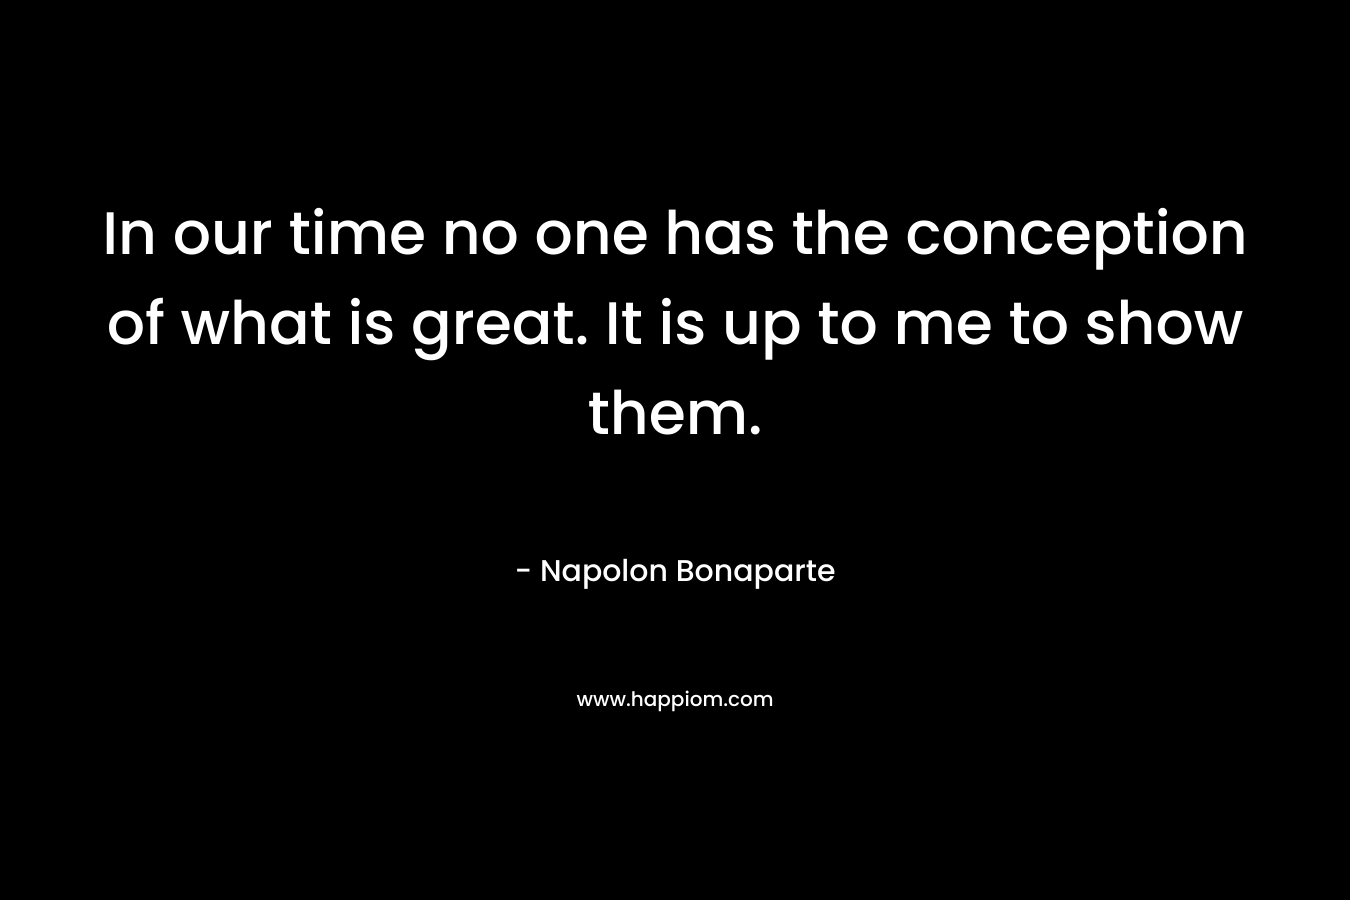 In our time no one has the conception of what is great. It is up to me to show them. – Napolon Bonaparte